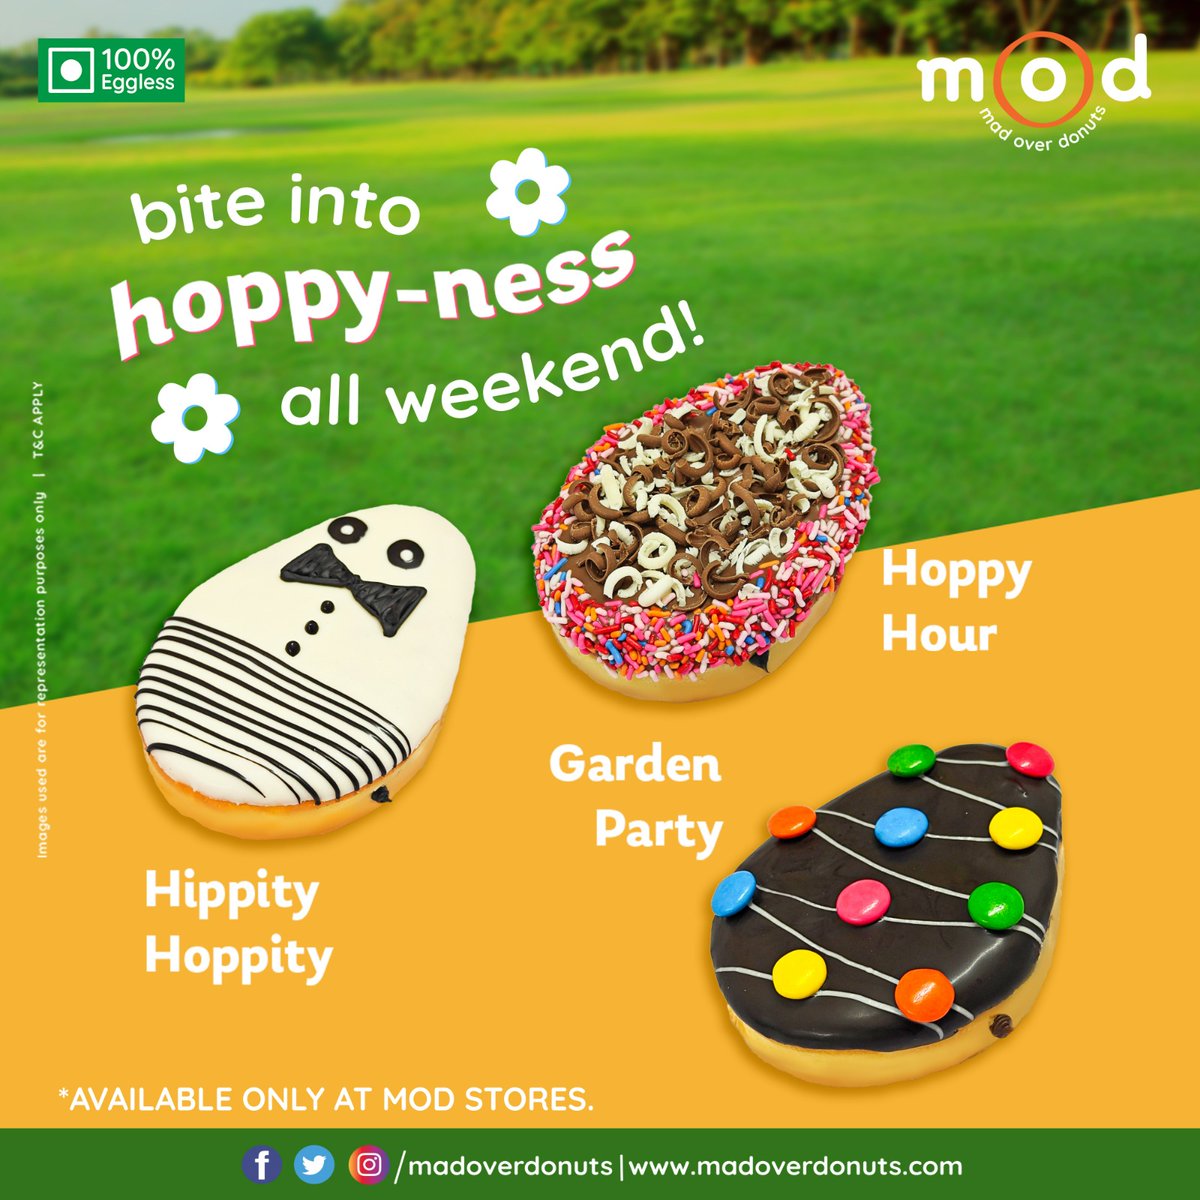 Hop, skip and jump to your nearest MOD store this #EasterWeekend—we have an exciting range of #Easter exclusive donuts for you! 

*Available only at @MadOverDonuts stores 

#MadOverDonuts #BiteIntoHappiness #EasterSunday #Celebrations #EasterDesserts #XperiaMall #PalavaCity